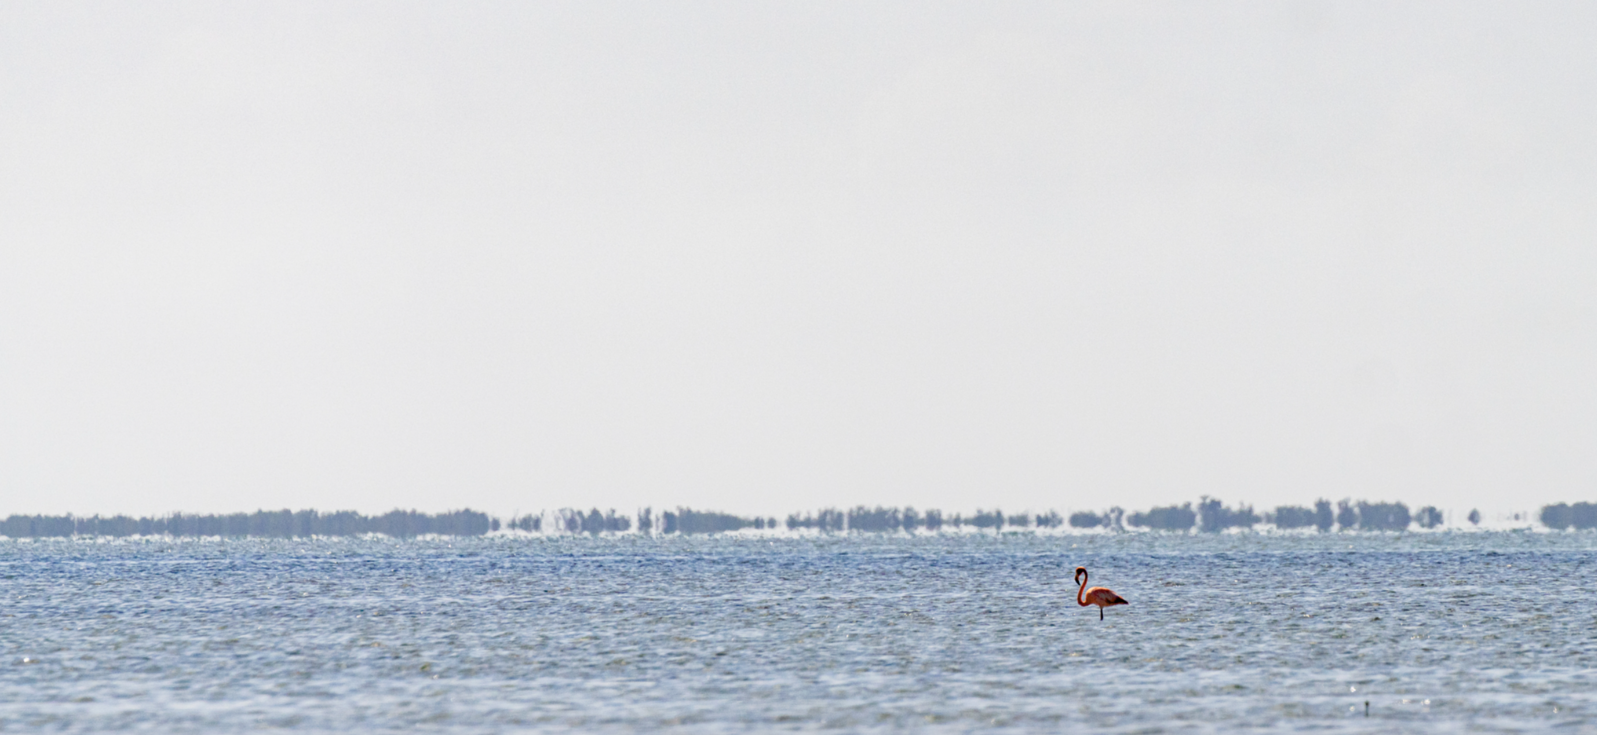 A flamingo standing in shallow water.